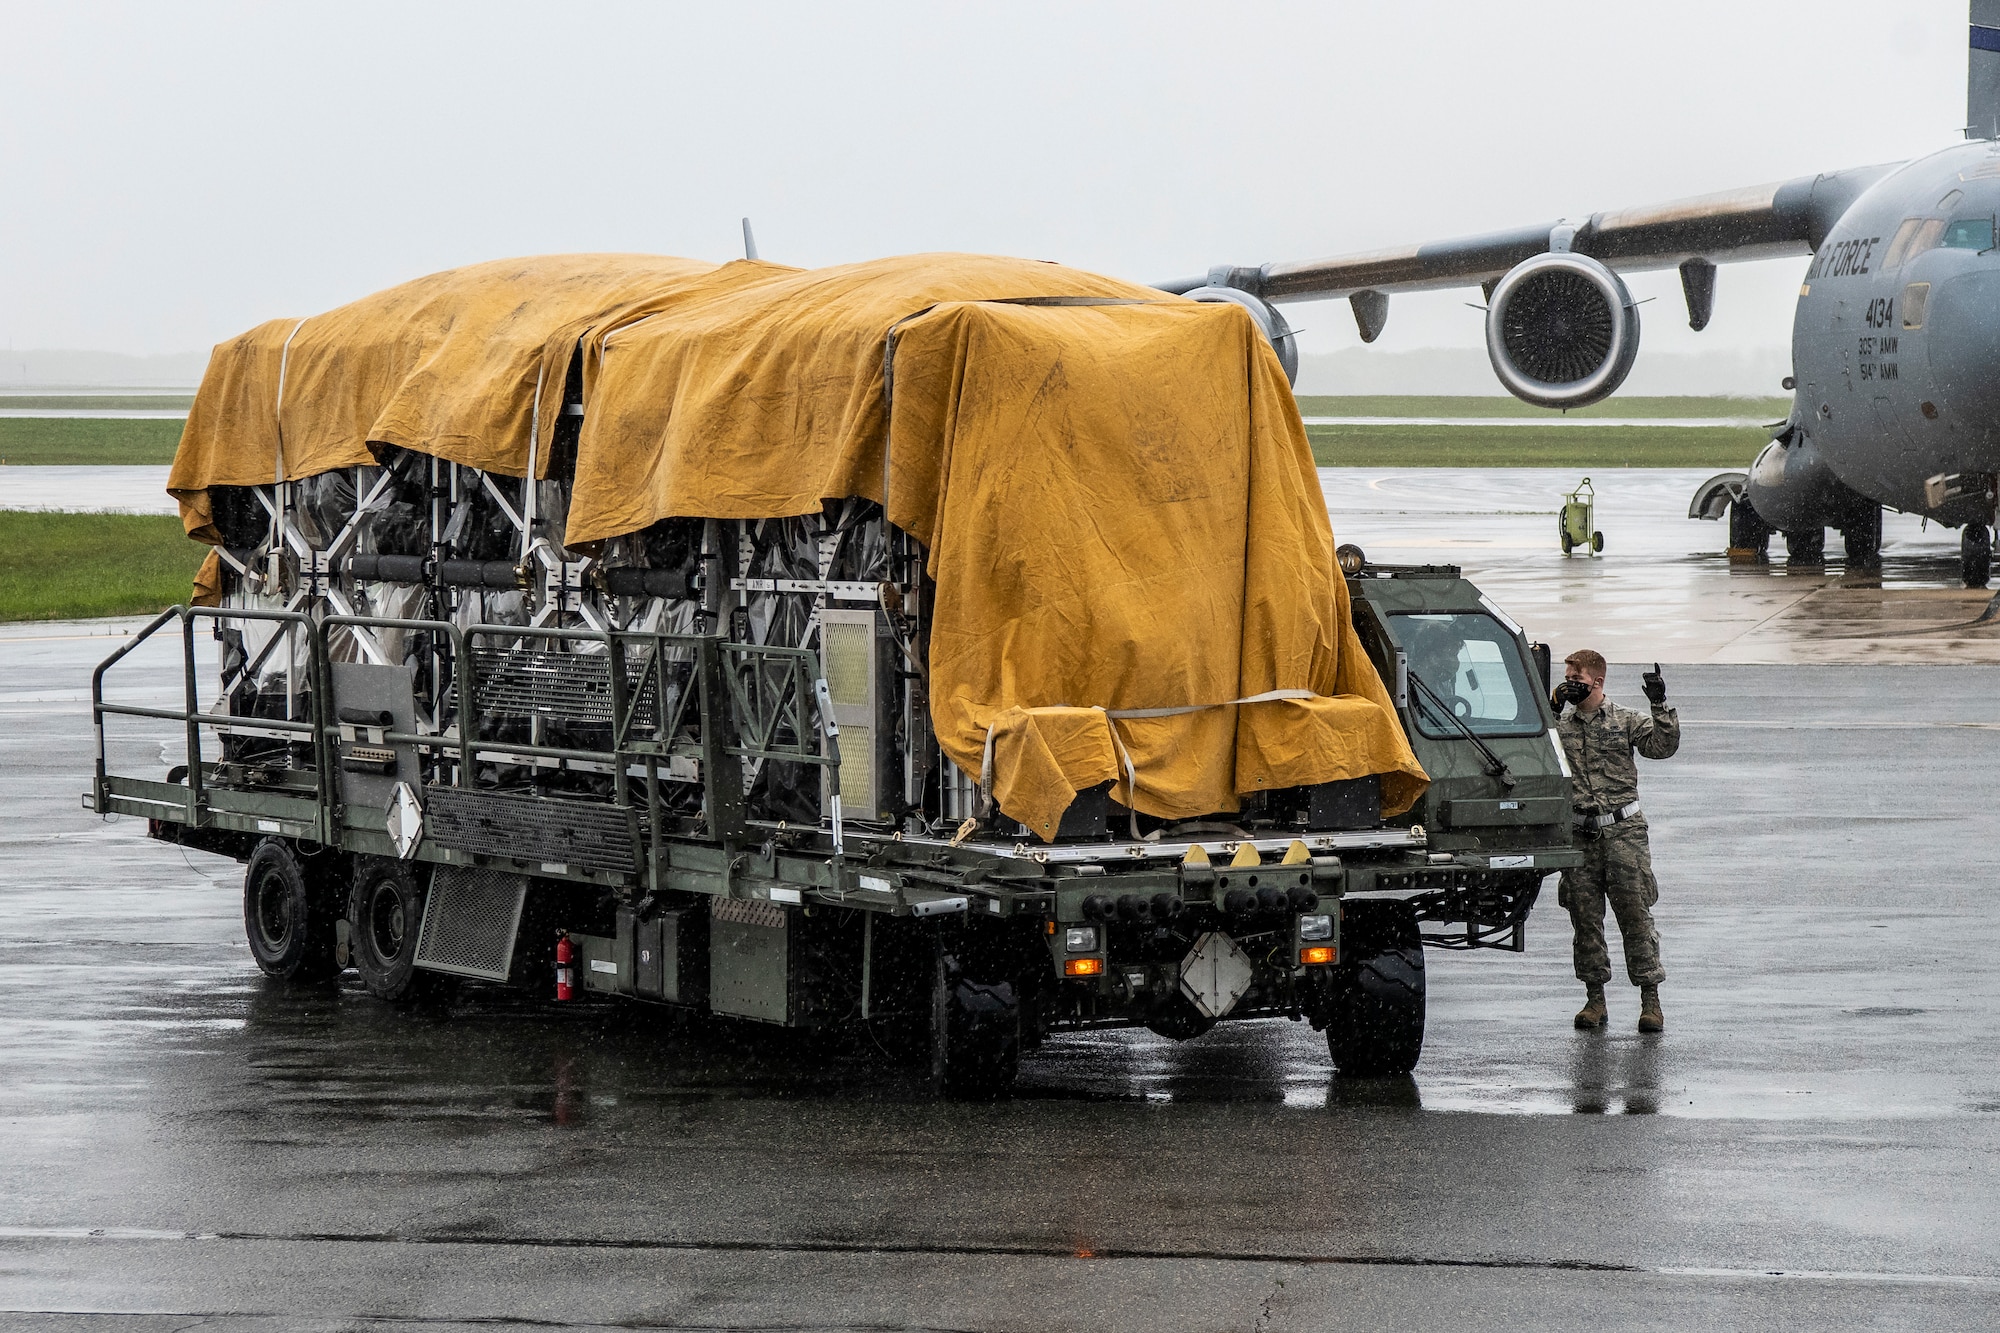 A 436th Aerial Port Squadron Airman guides a K-loader at Dover Air Force Base, Delaware, April 30, 2020. Tarps were placed on top of Transport Isolation Systems due to inclement weather at Dover AFB. In accordance with health protection policies, Dover AFB will serve as the sole hub for TIS decontamination on the East Coast. (U.S. Air Force photo by Senior Airman Christopher Quail)